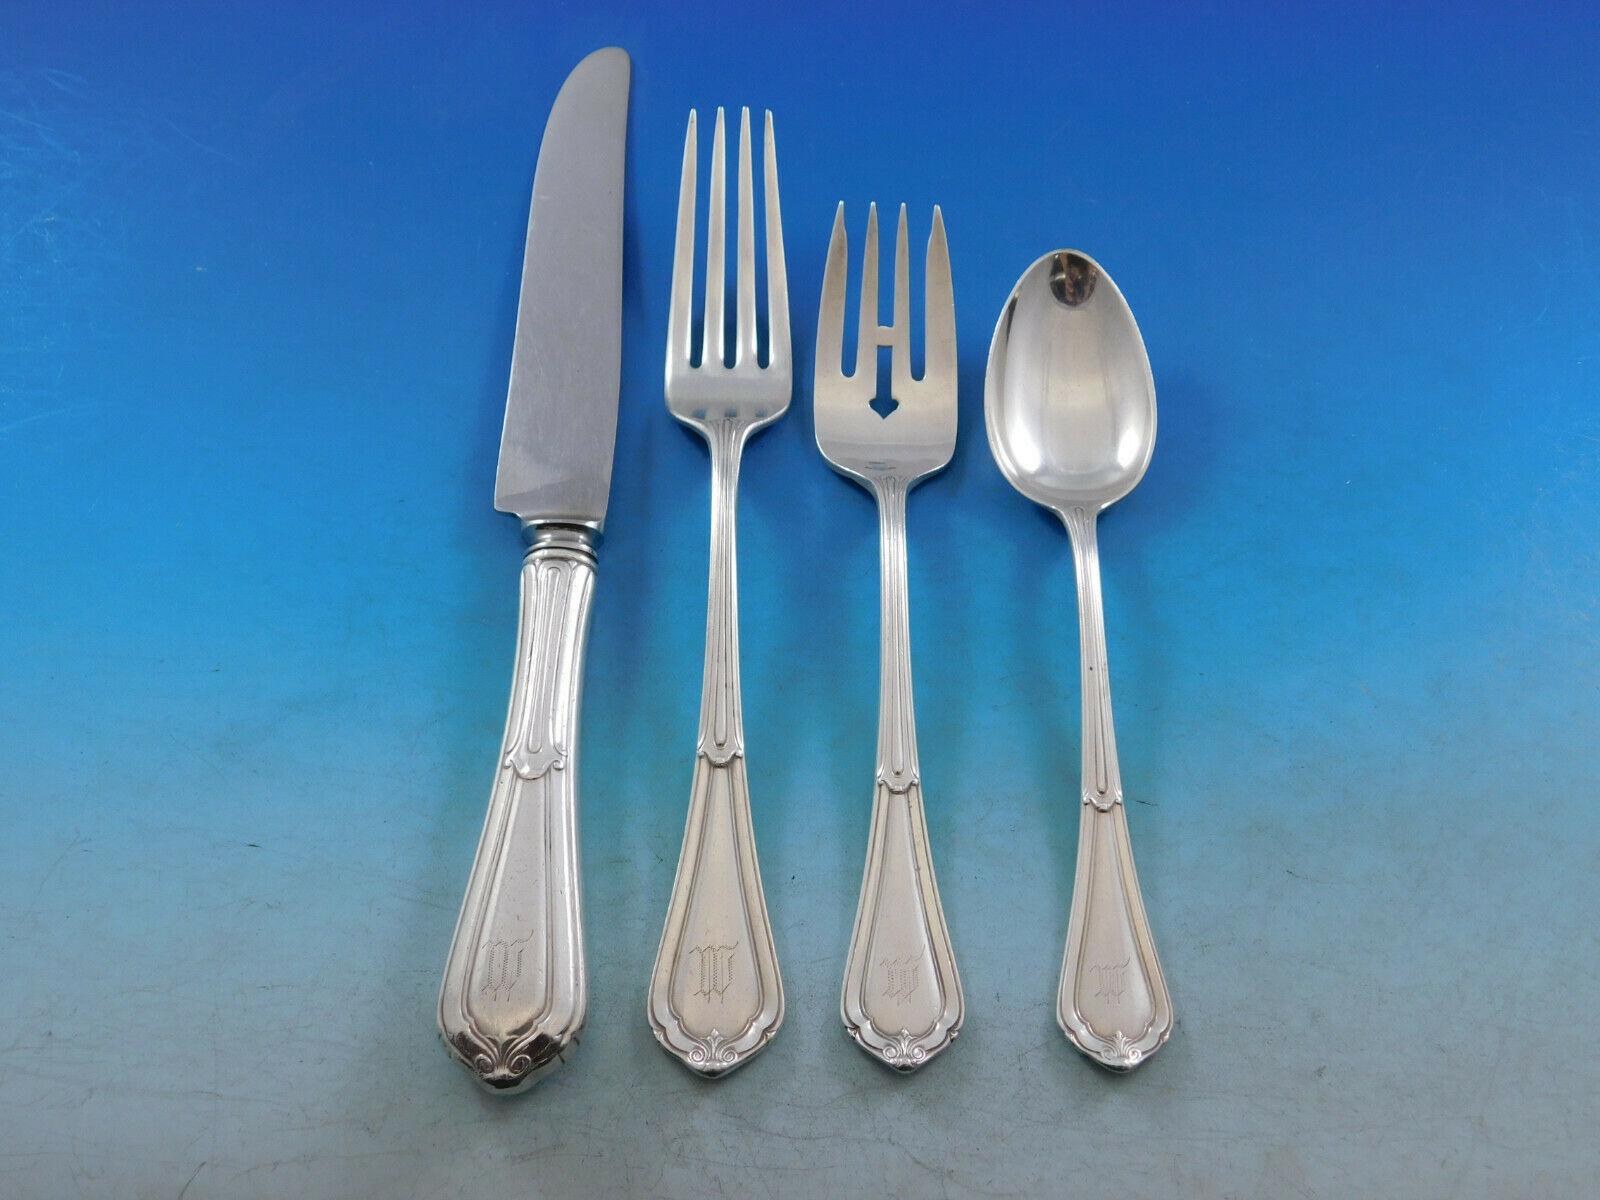 La Salle by Dominick and Haff circa 1928 Sterling Silver flatware set - 43 pieces. This set includes:

6 Regular knives, 8 3/4